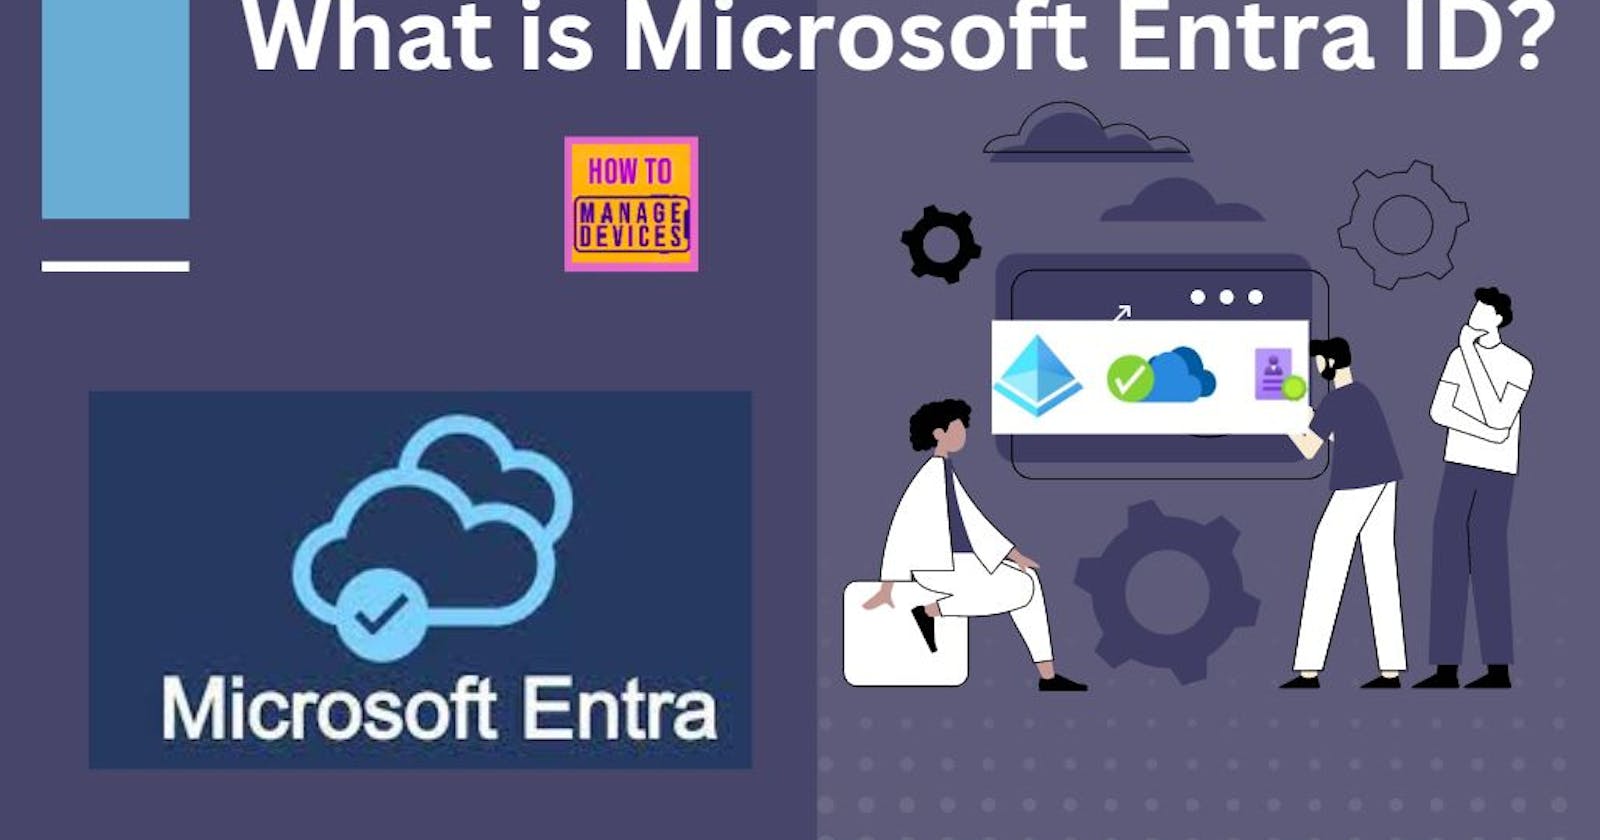 How to create new user in Microsoft Entra ID